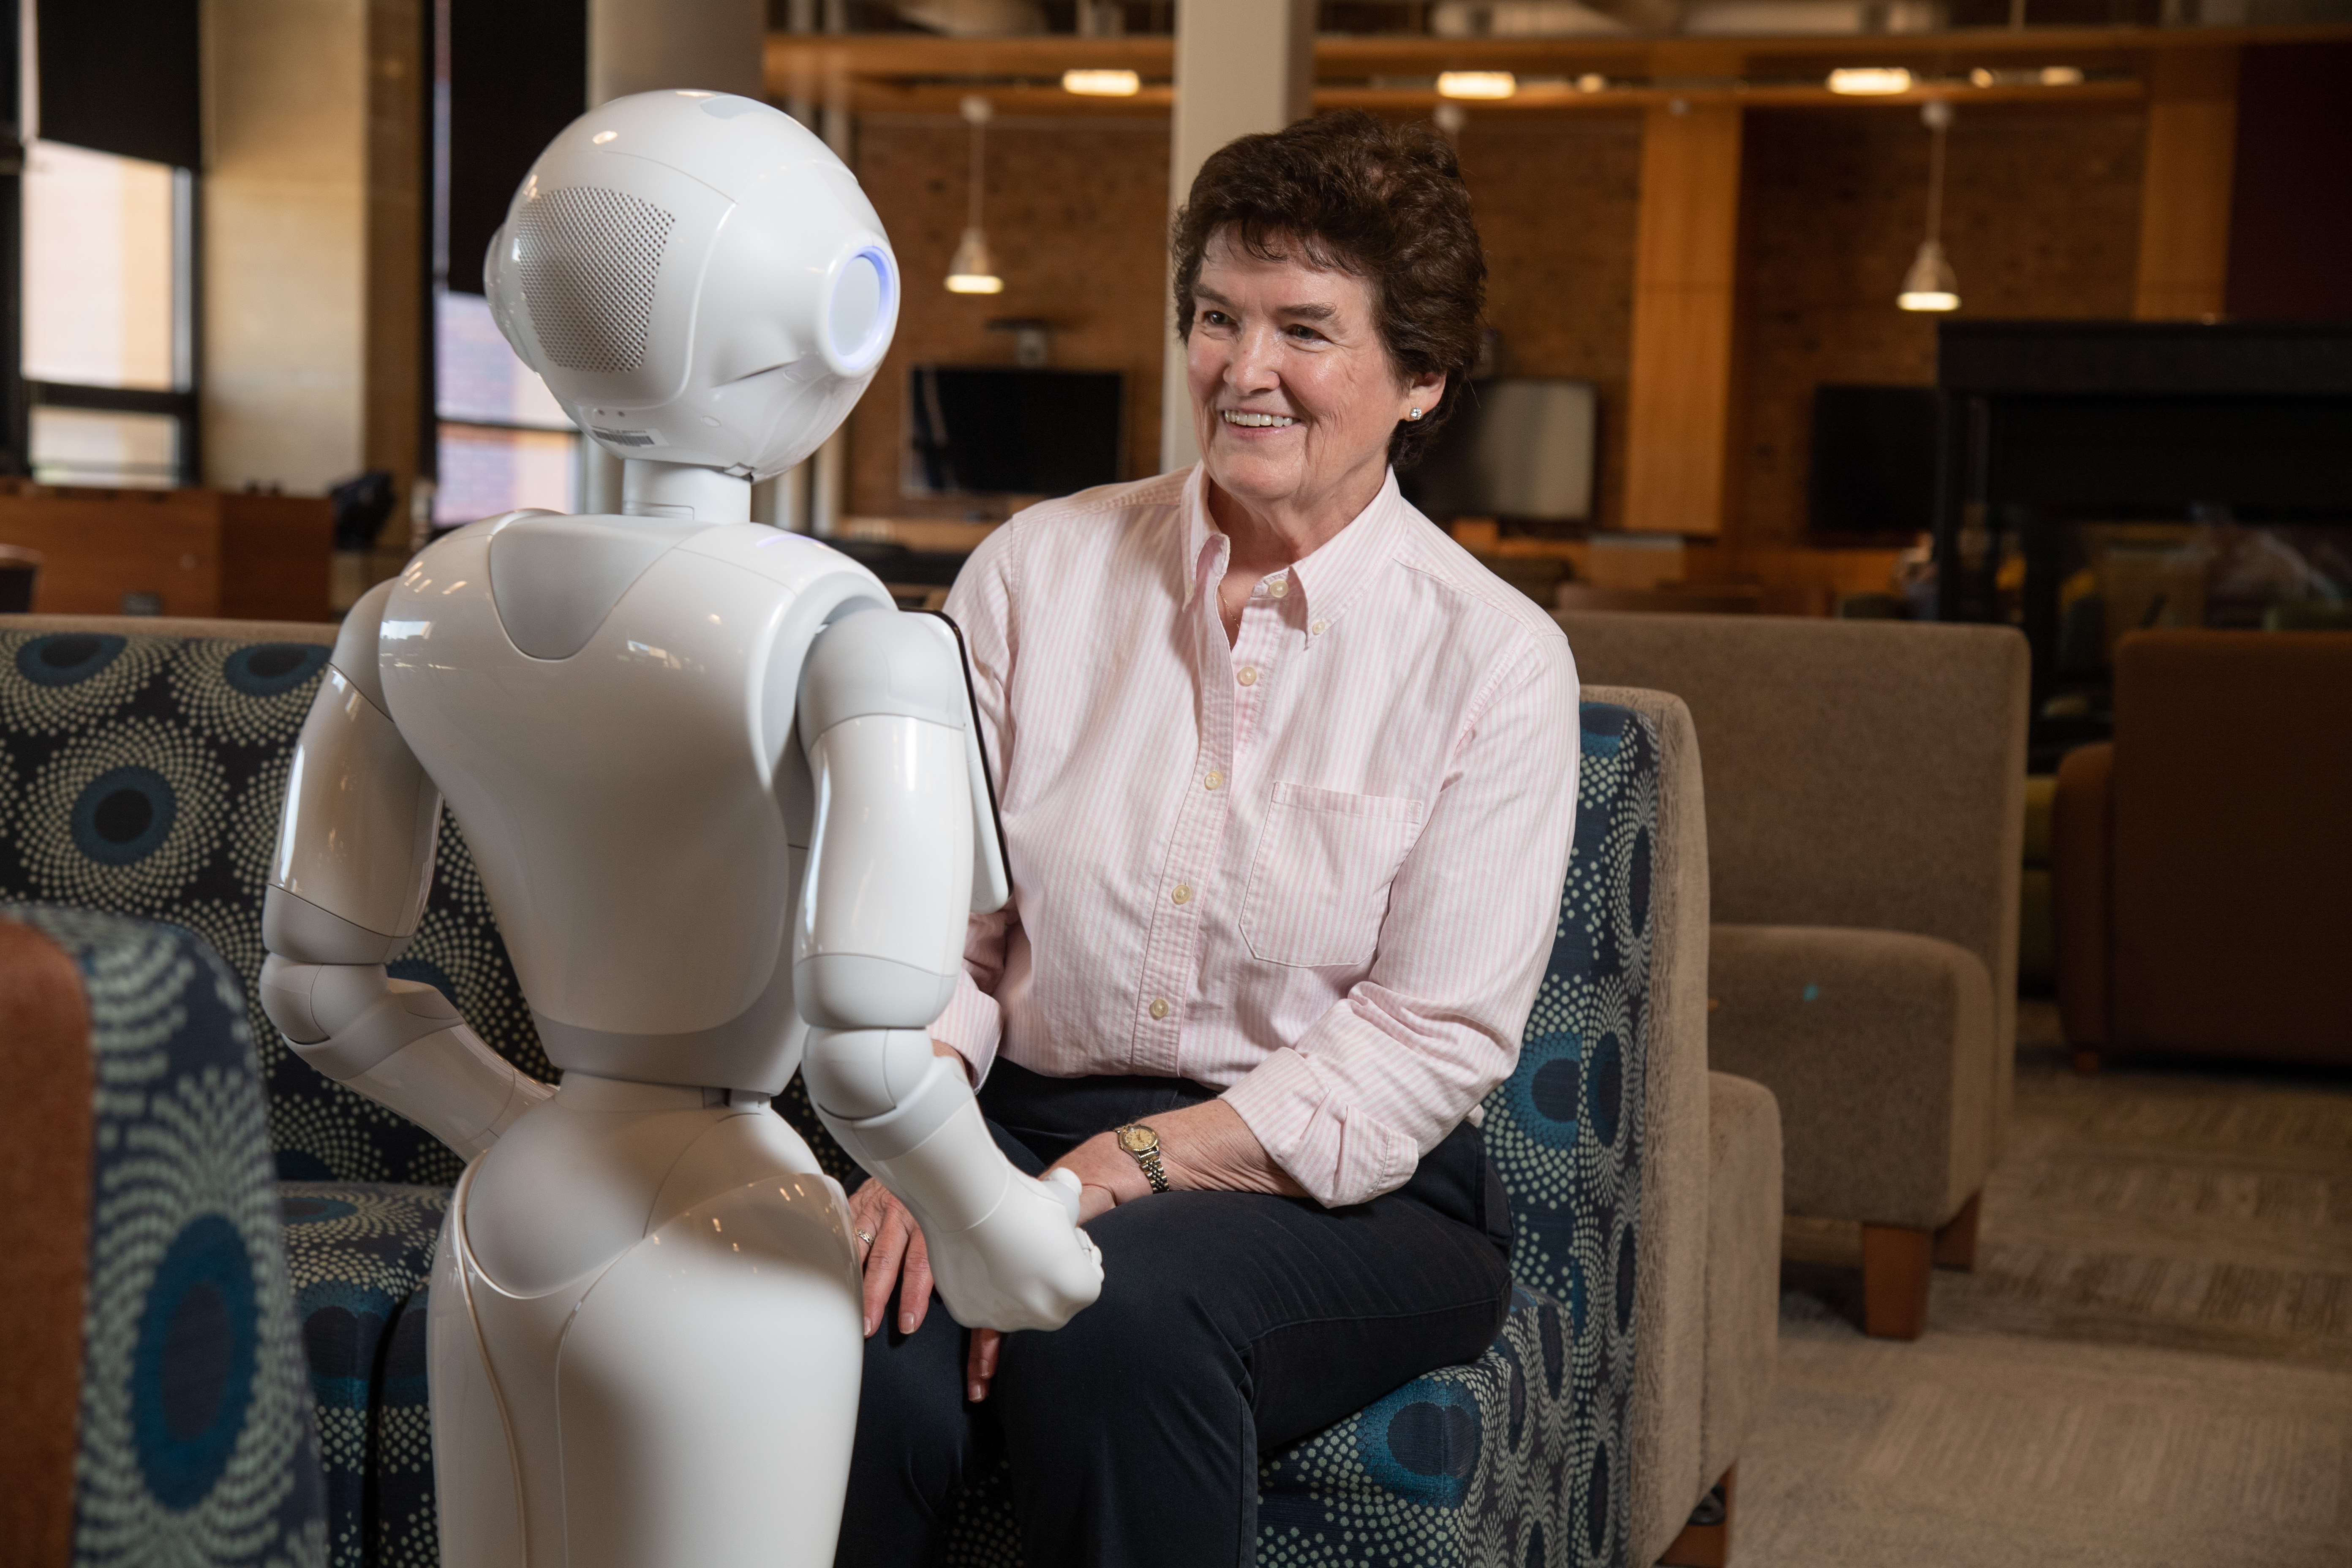 An older woman smiling at a robot.